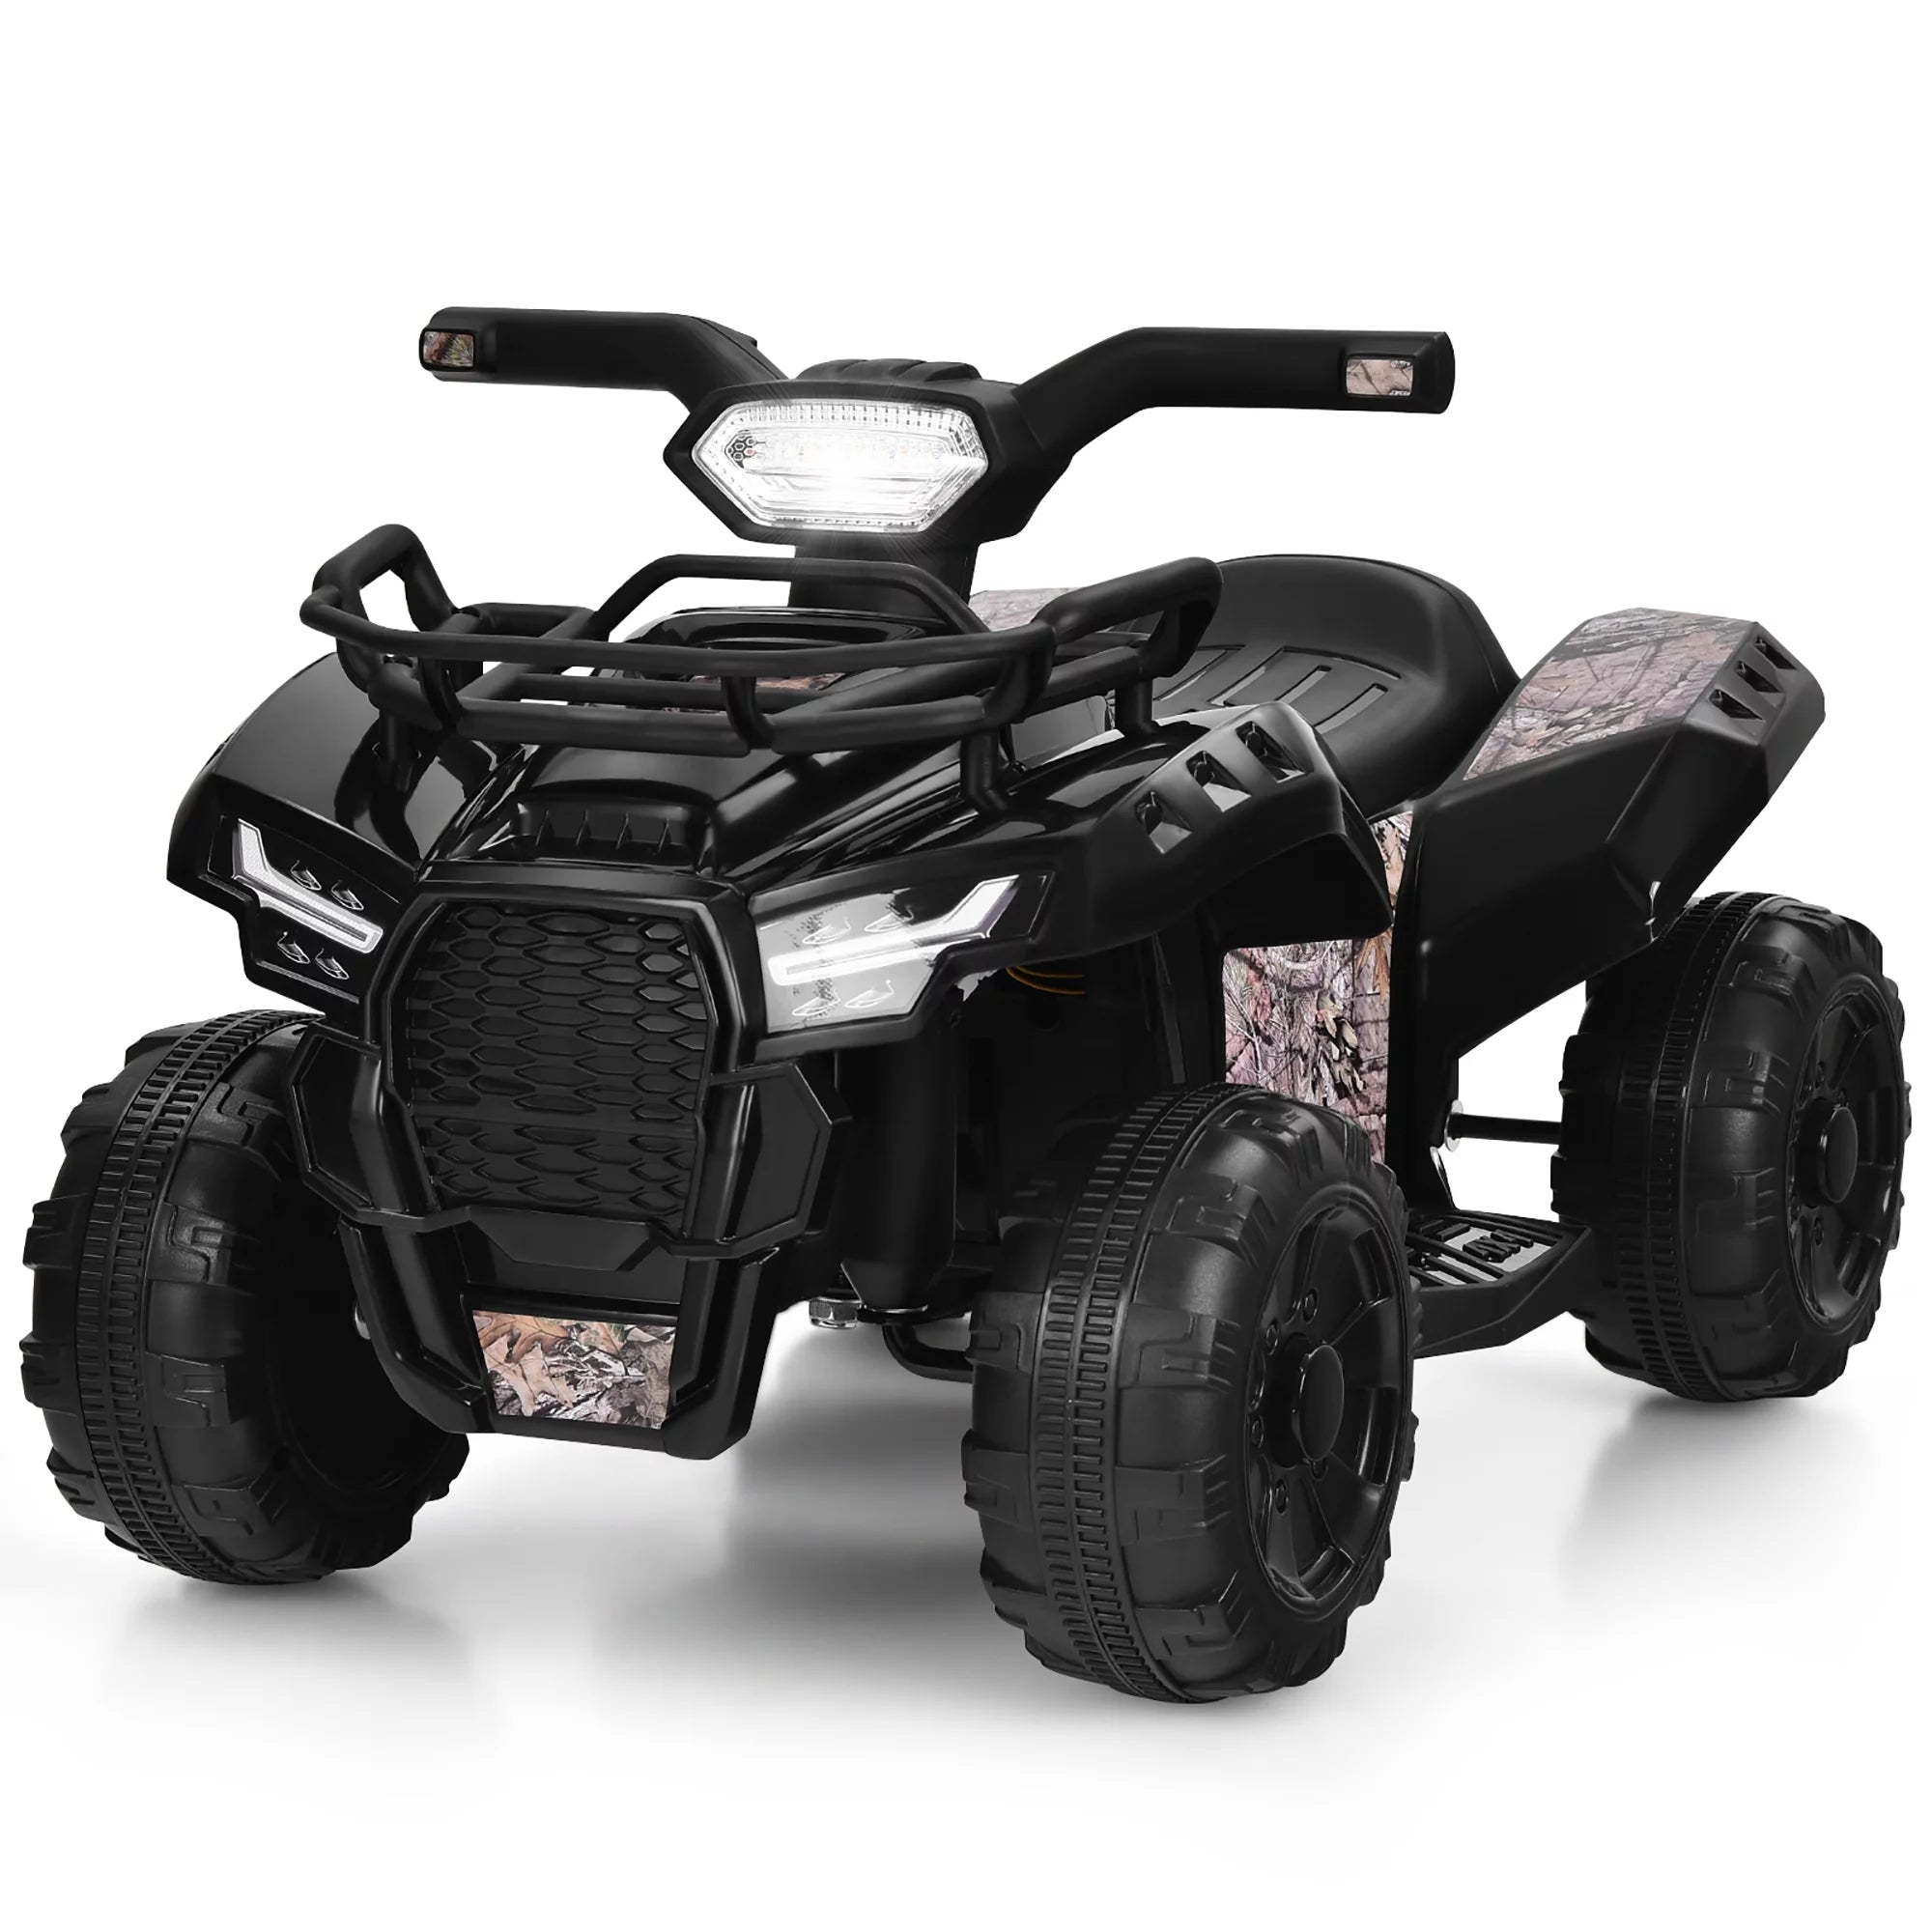 6V ATV Powered Ride-on With LED Light (4 Colors)